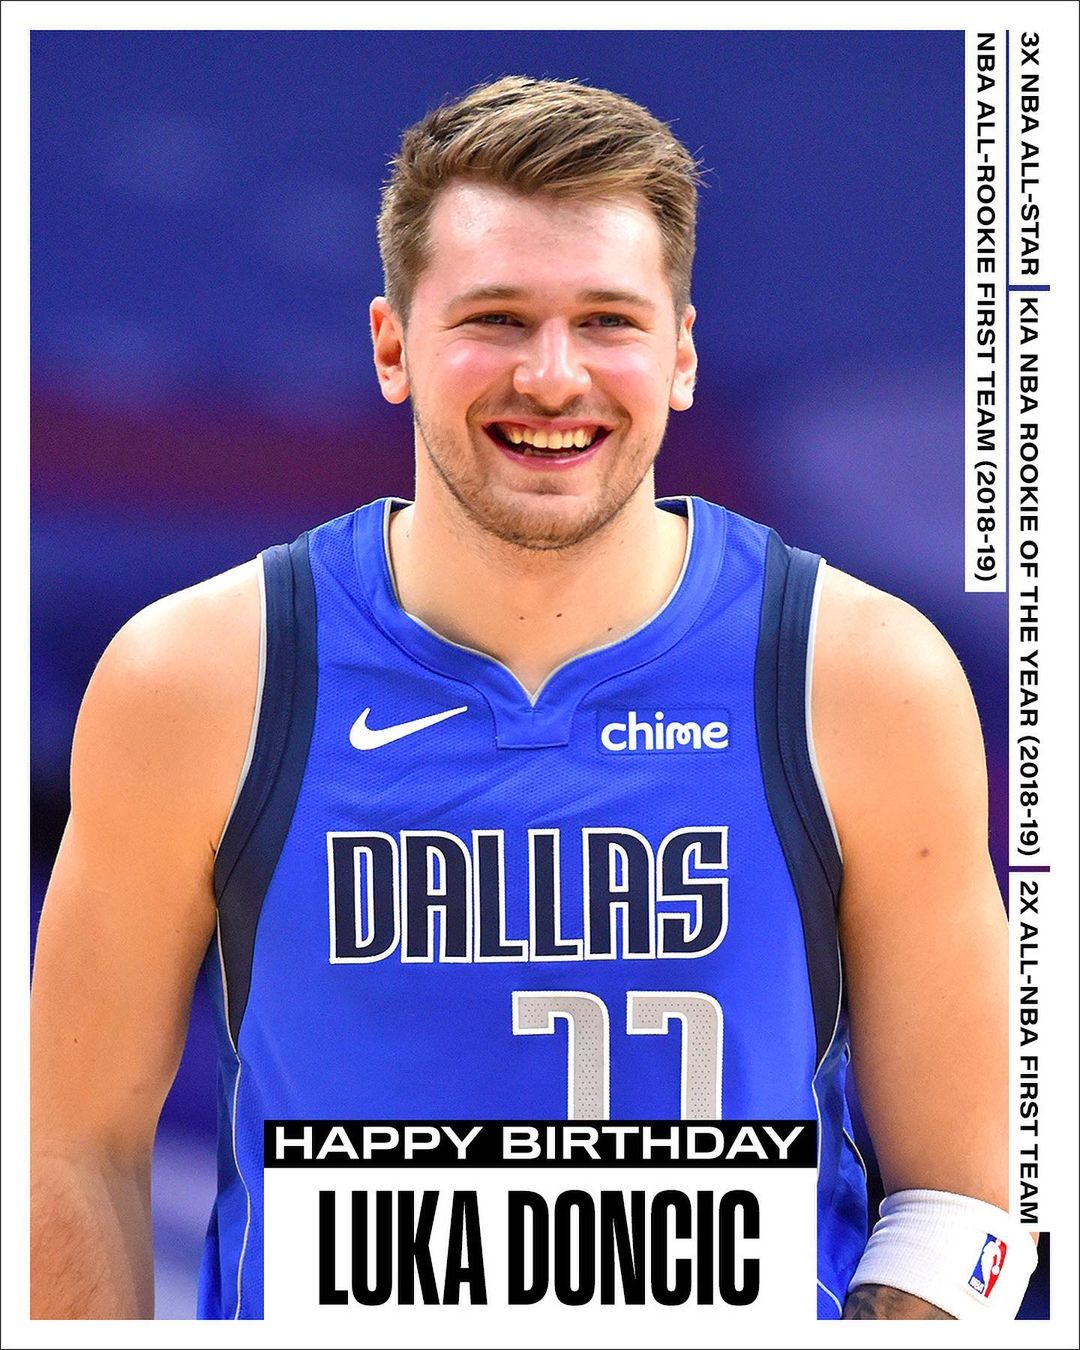 Join us in wishing @lukadoncic of the @dallasmavs a HAPPY 23rd BIRTHDAY! #NBABDA...